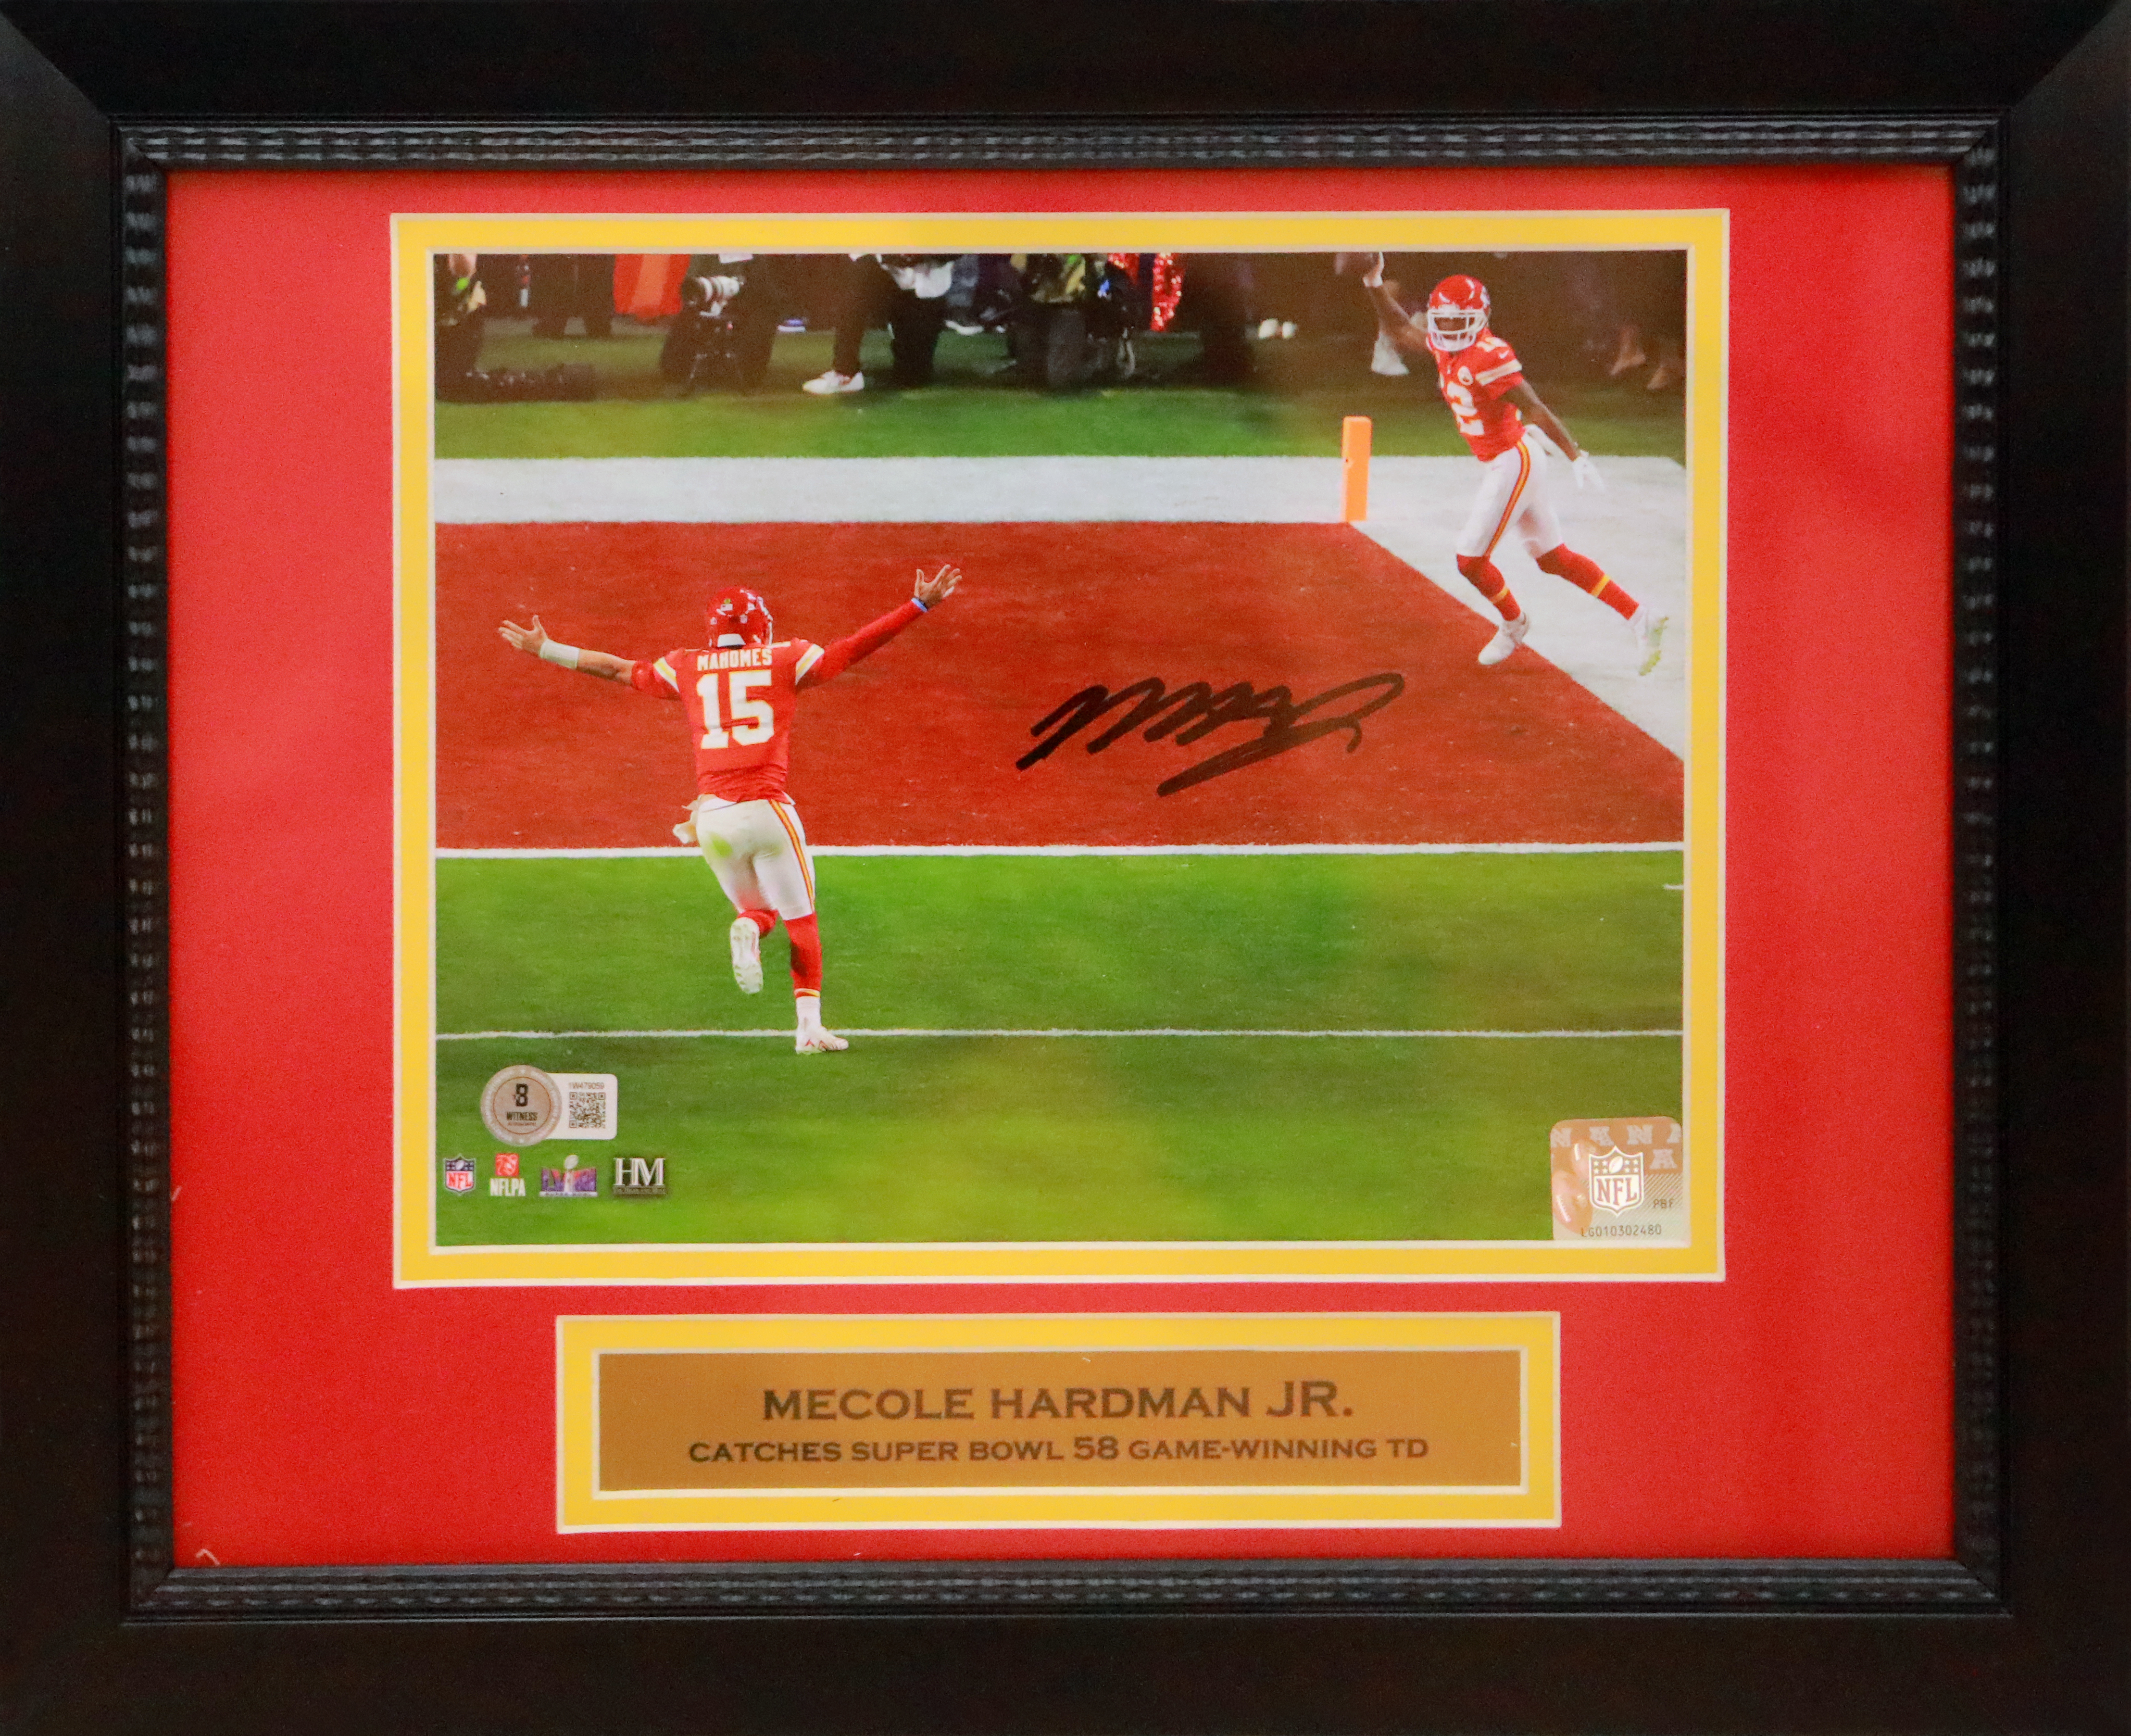 Mecole Hardman Jr Autographed Kansas City Chiefs Signed Super Bowl 58 Game Winning Touchdown From Patrick Mahomes Signed 8x10 Football Framed Photo Beckett COA